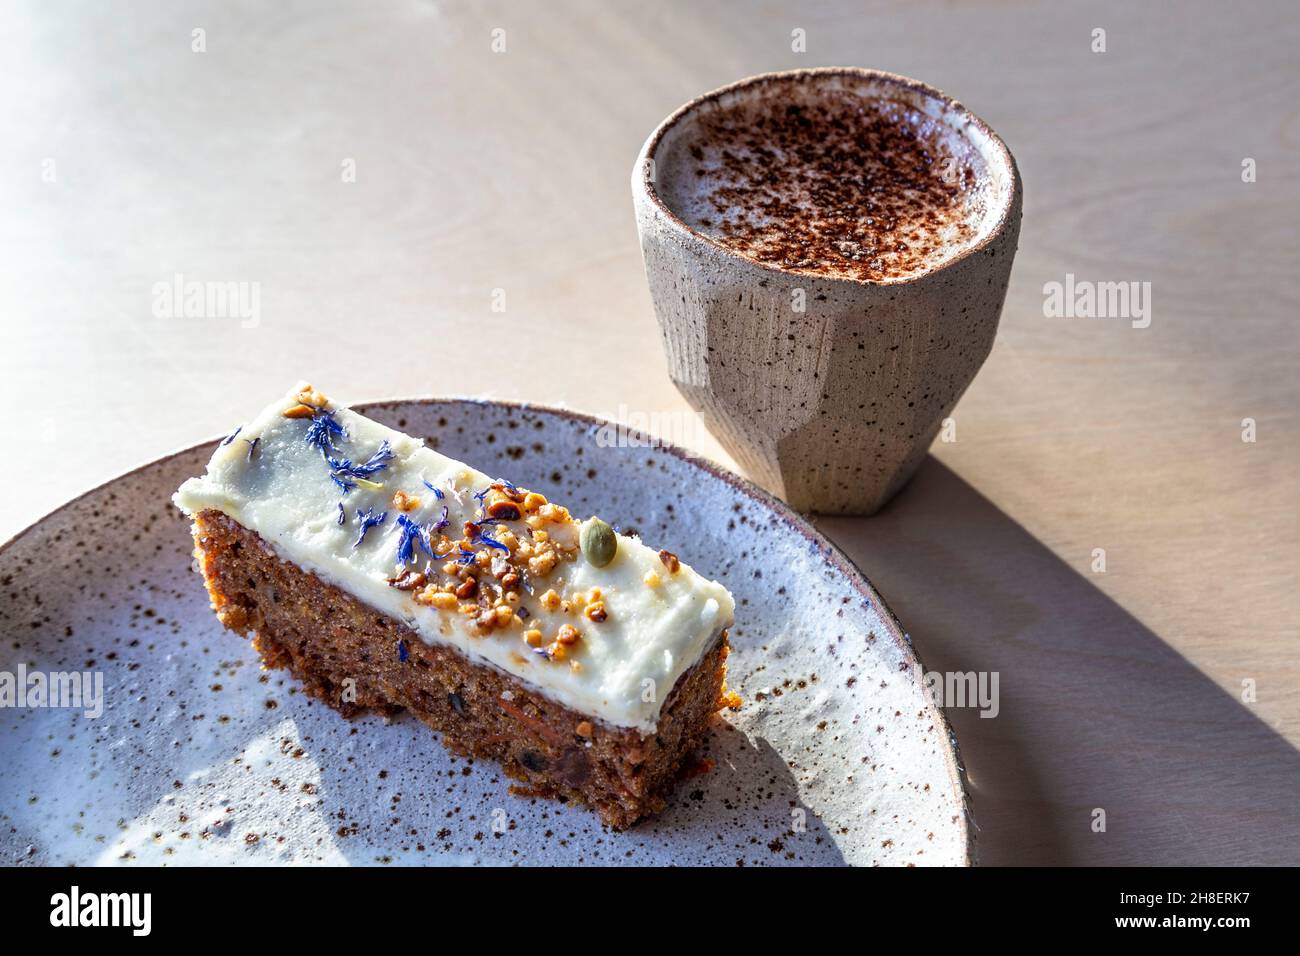 Coffee and cake (The Fixagon cafe near Angel and Dalston, London, UK) Stock Photo